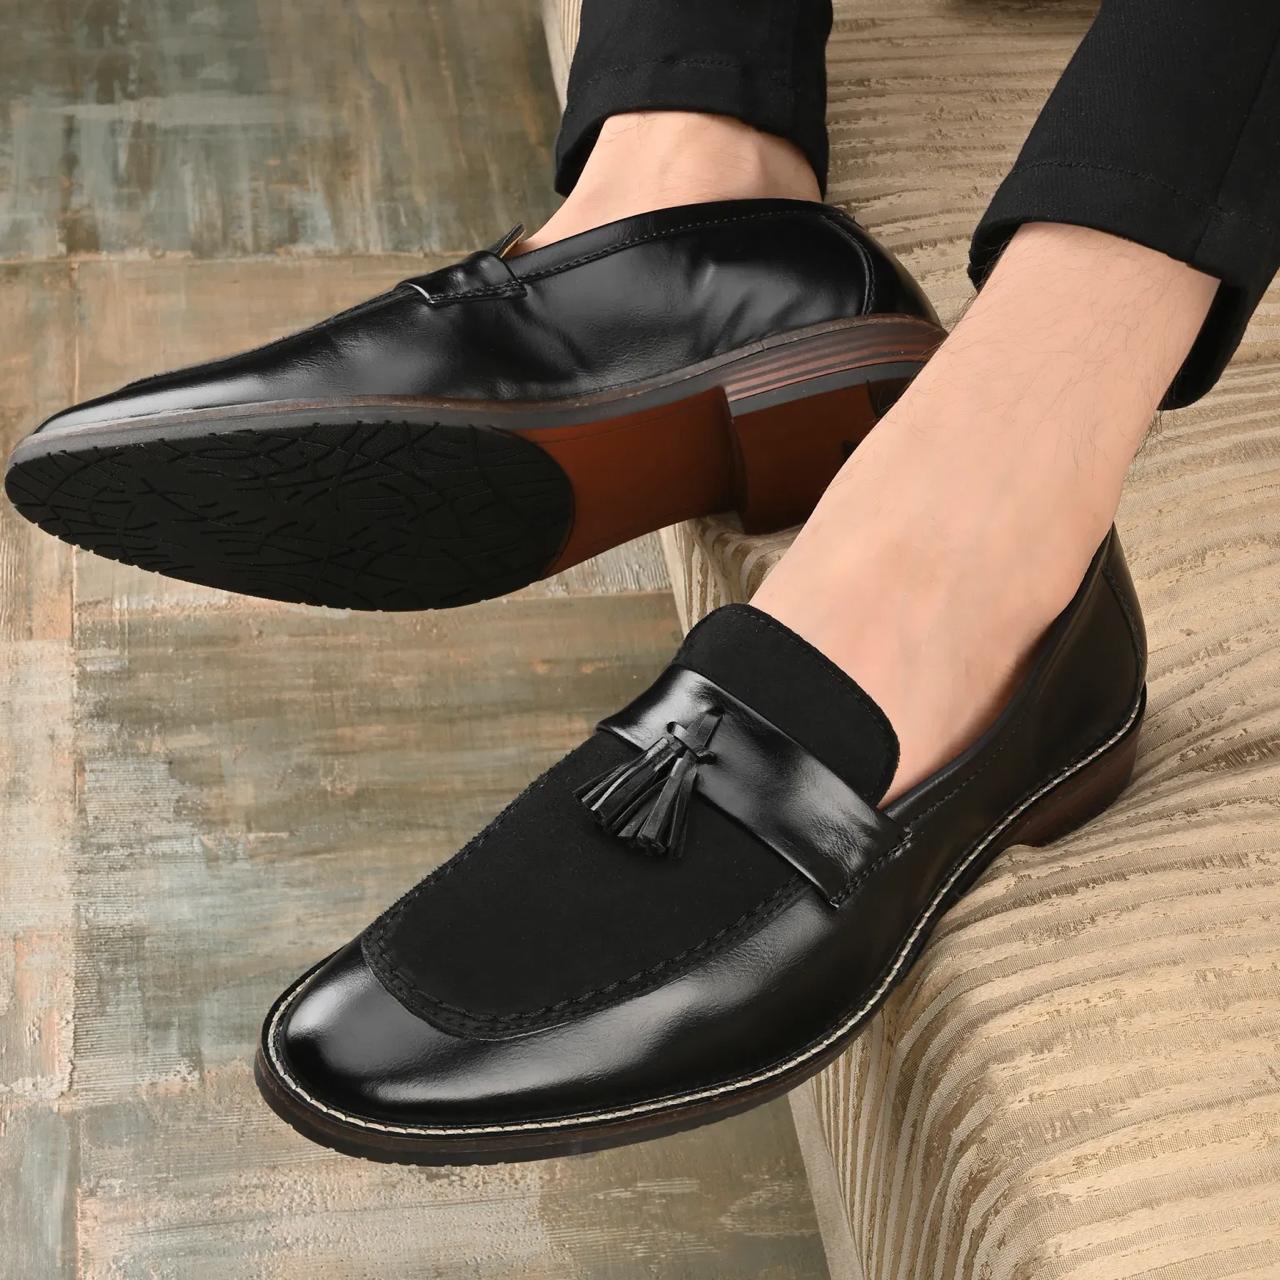 New Arrival Stylish Fashion Pointed Toe Formal Shoes For Office, Wedding And Party Wear-Unique and Classy